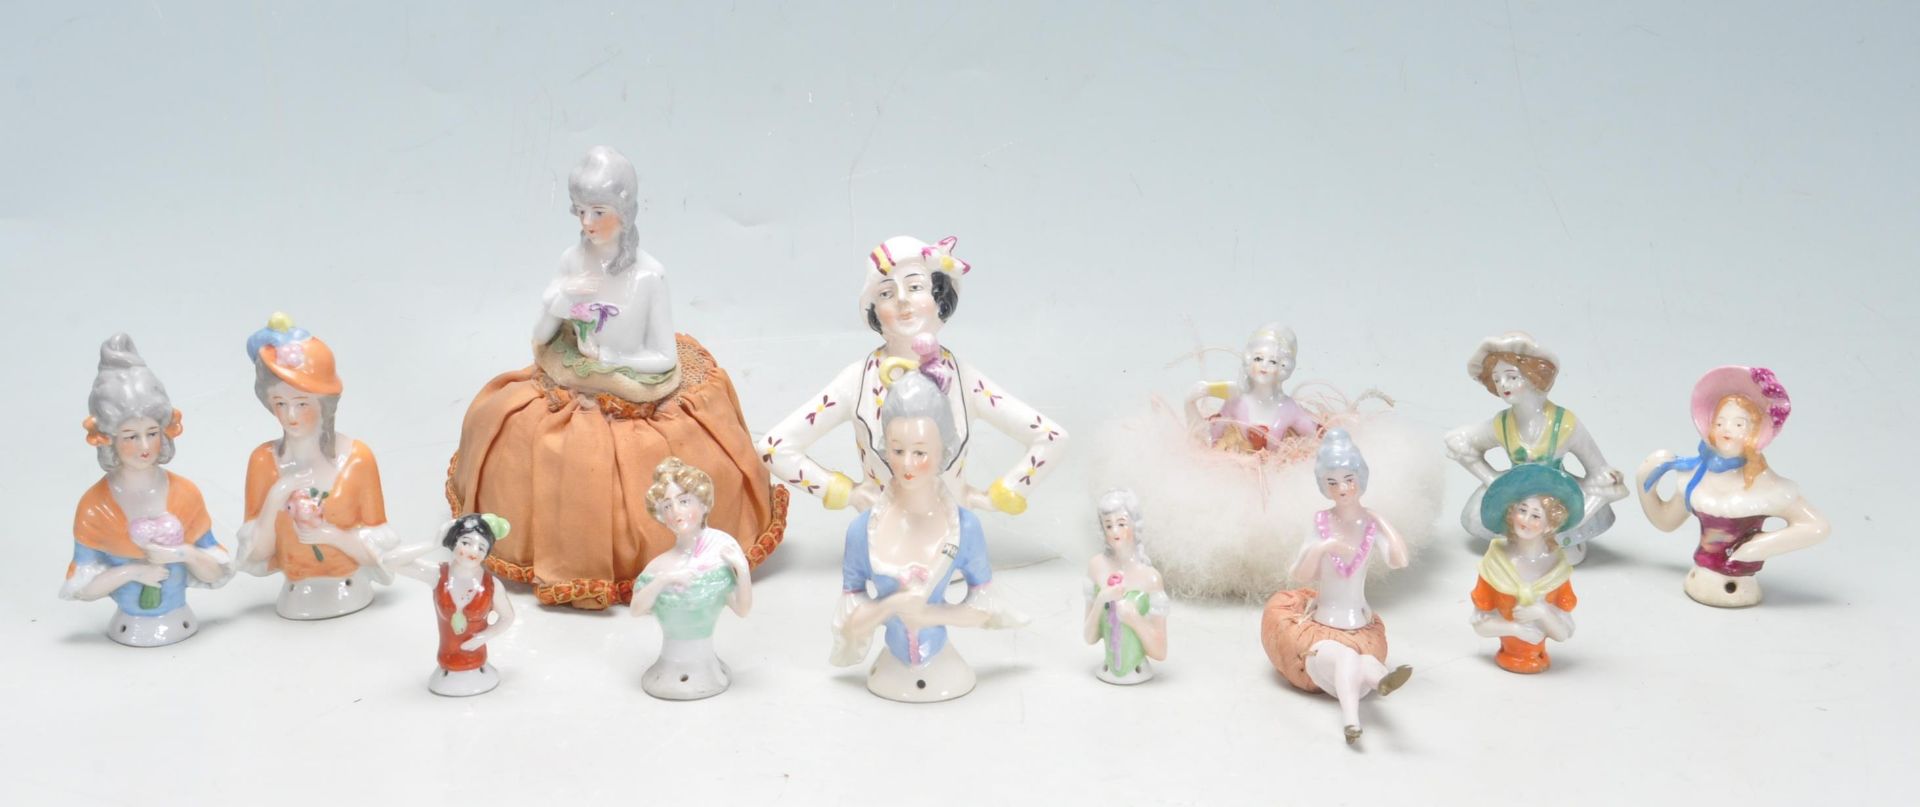 COLLECTION OF 28 PIN CUSHION HALF DOLLS